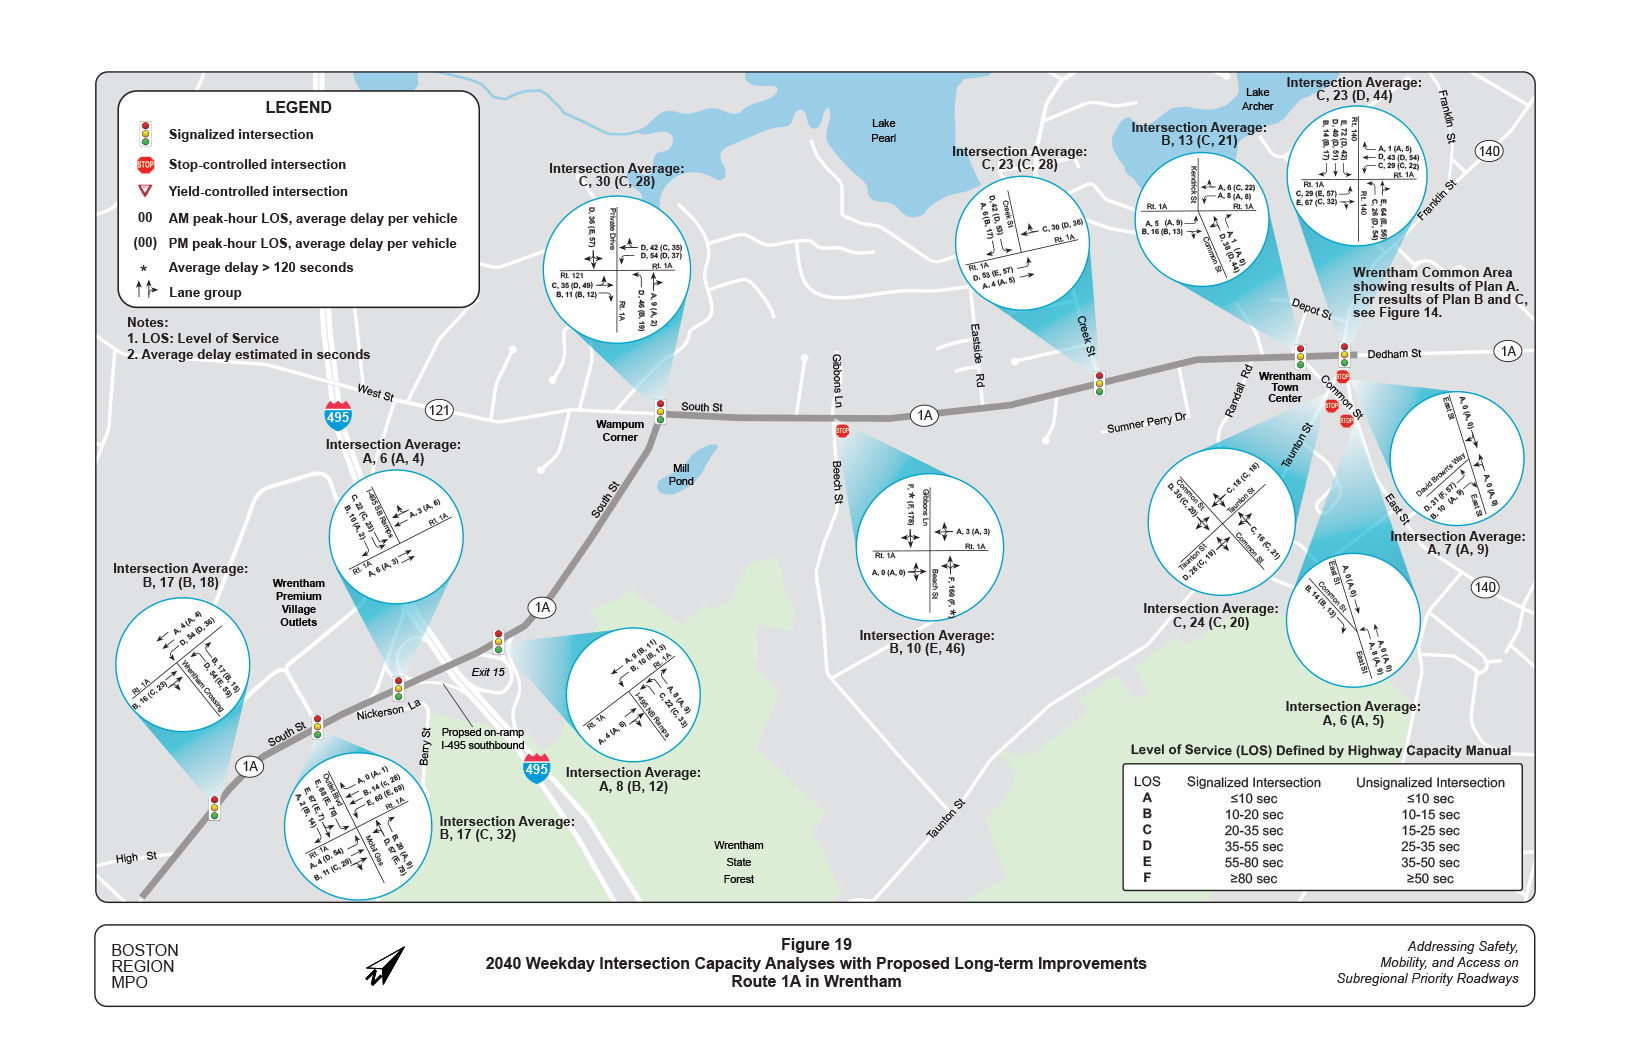 Figure 19 is a map with diagrams showing weekday level of service and average delay per vehicle, projected to the year 2040 and assuming the implementation of the proposed long-term improvements, for intersections on Route 1A in Wrentham.